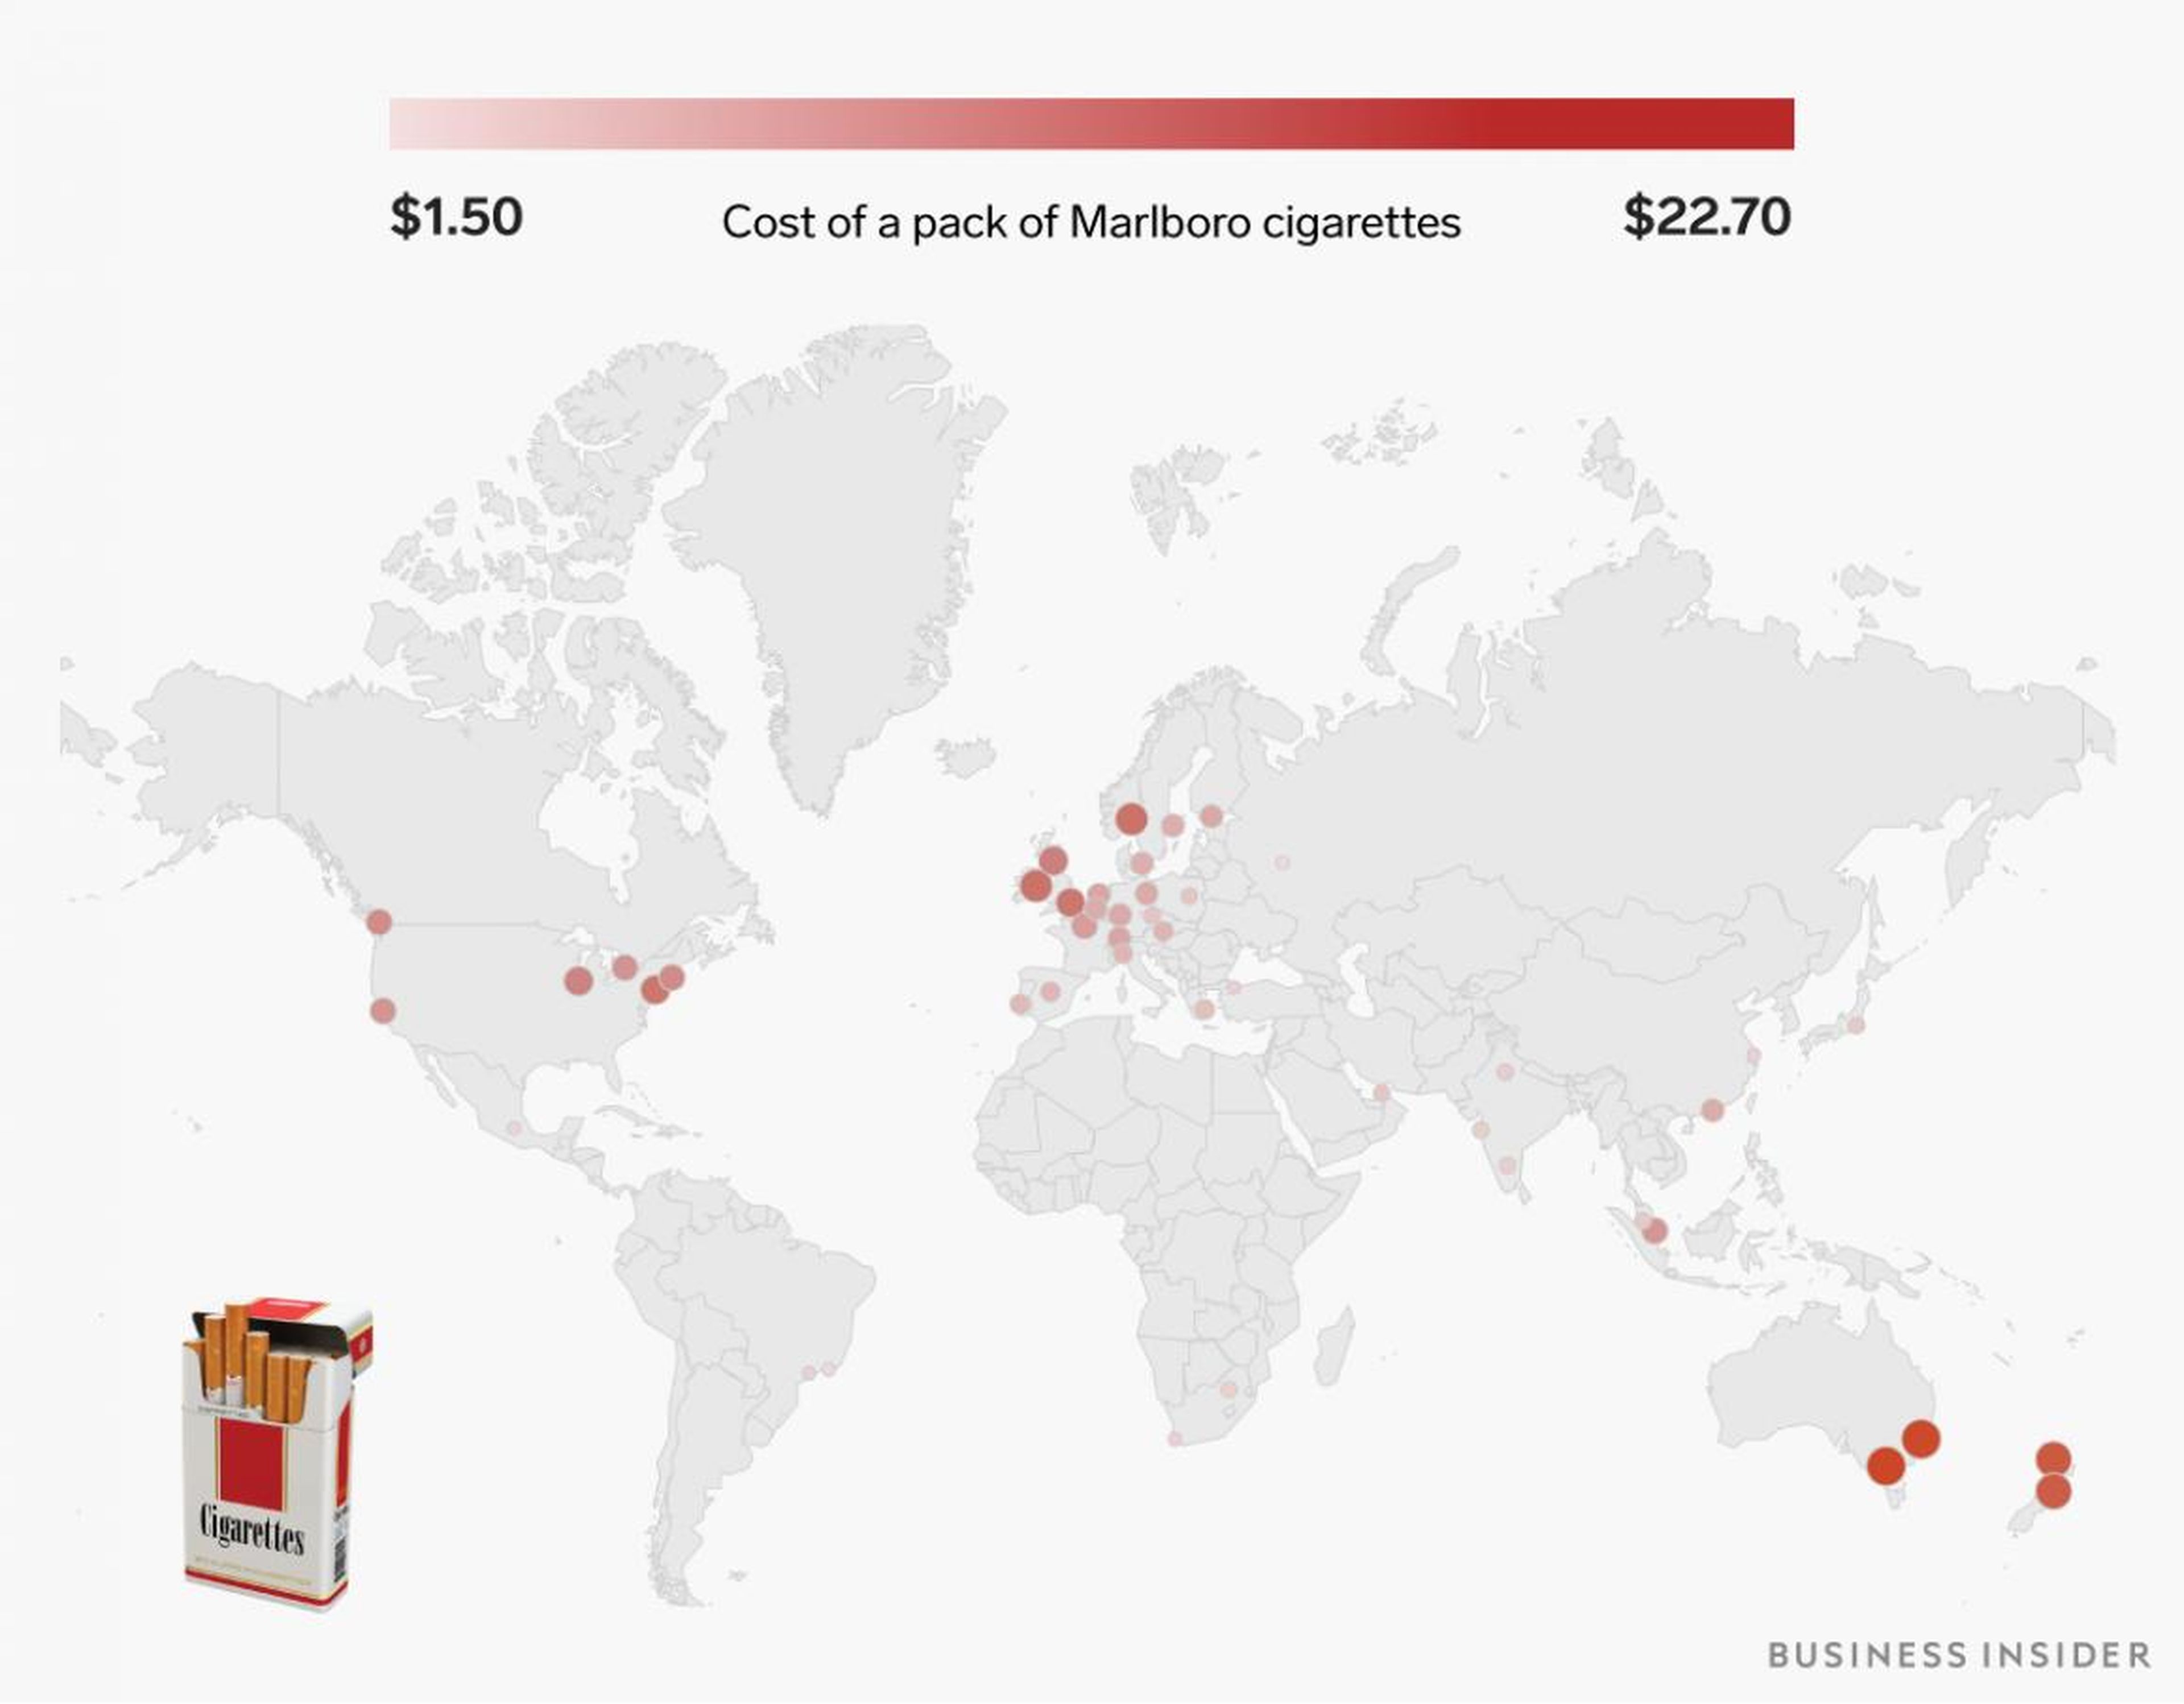 A pack of Marlboro cigarettes ranges from $1.50 to over $22.